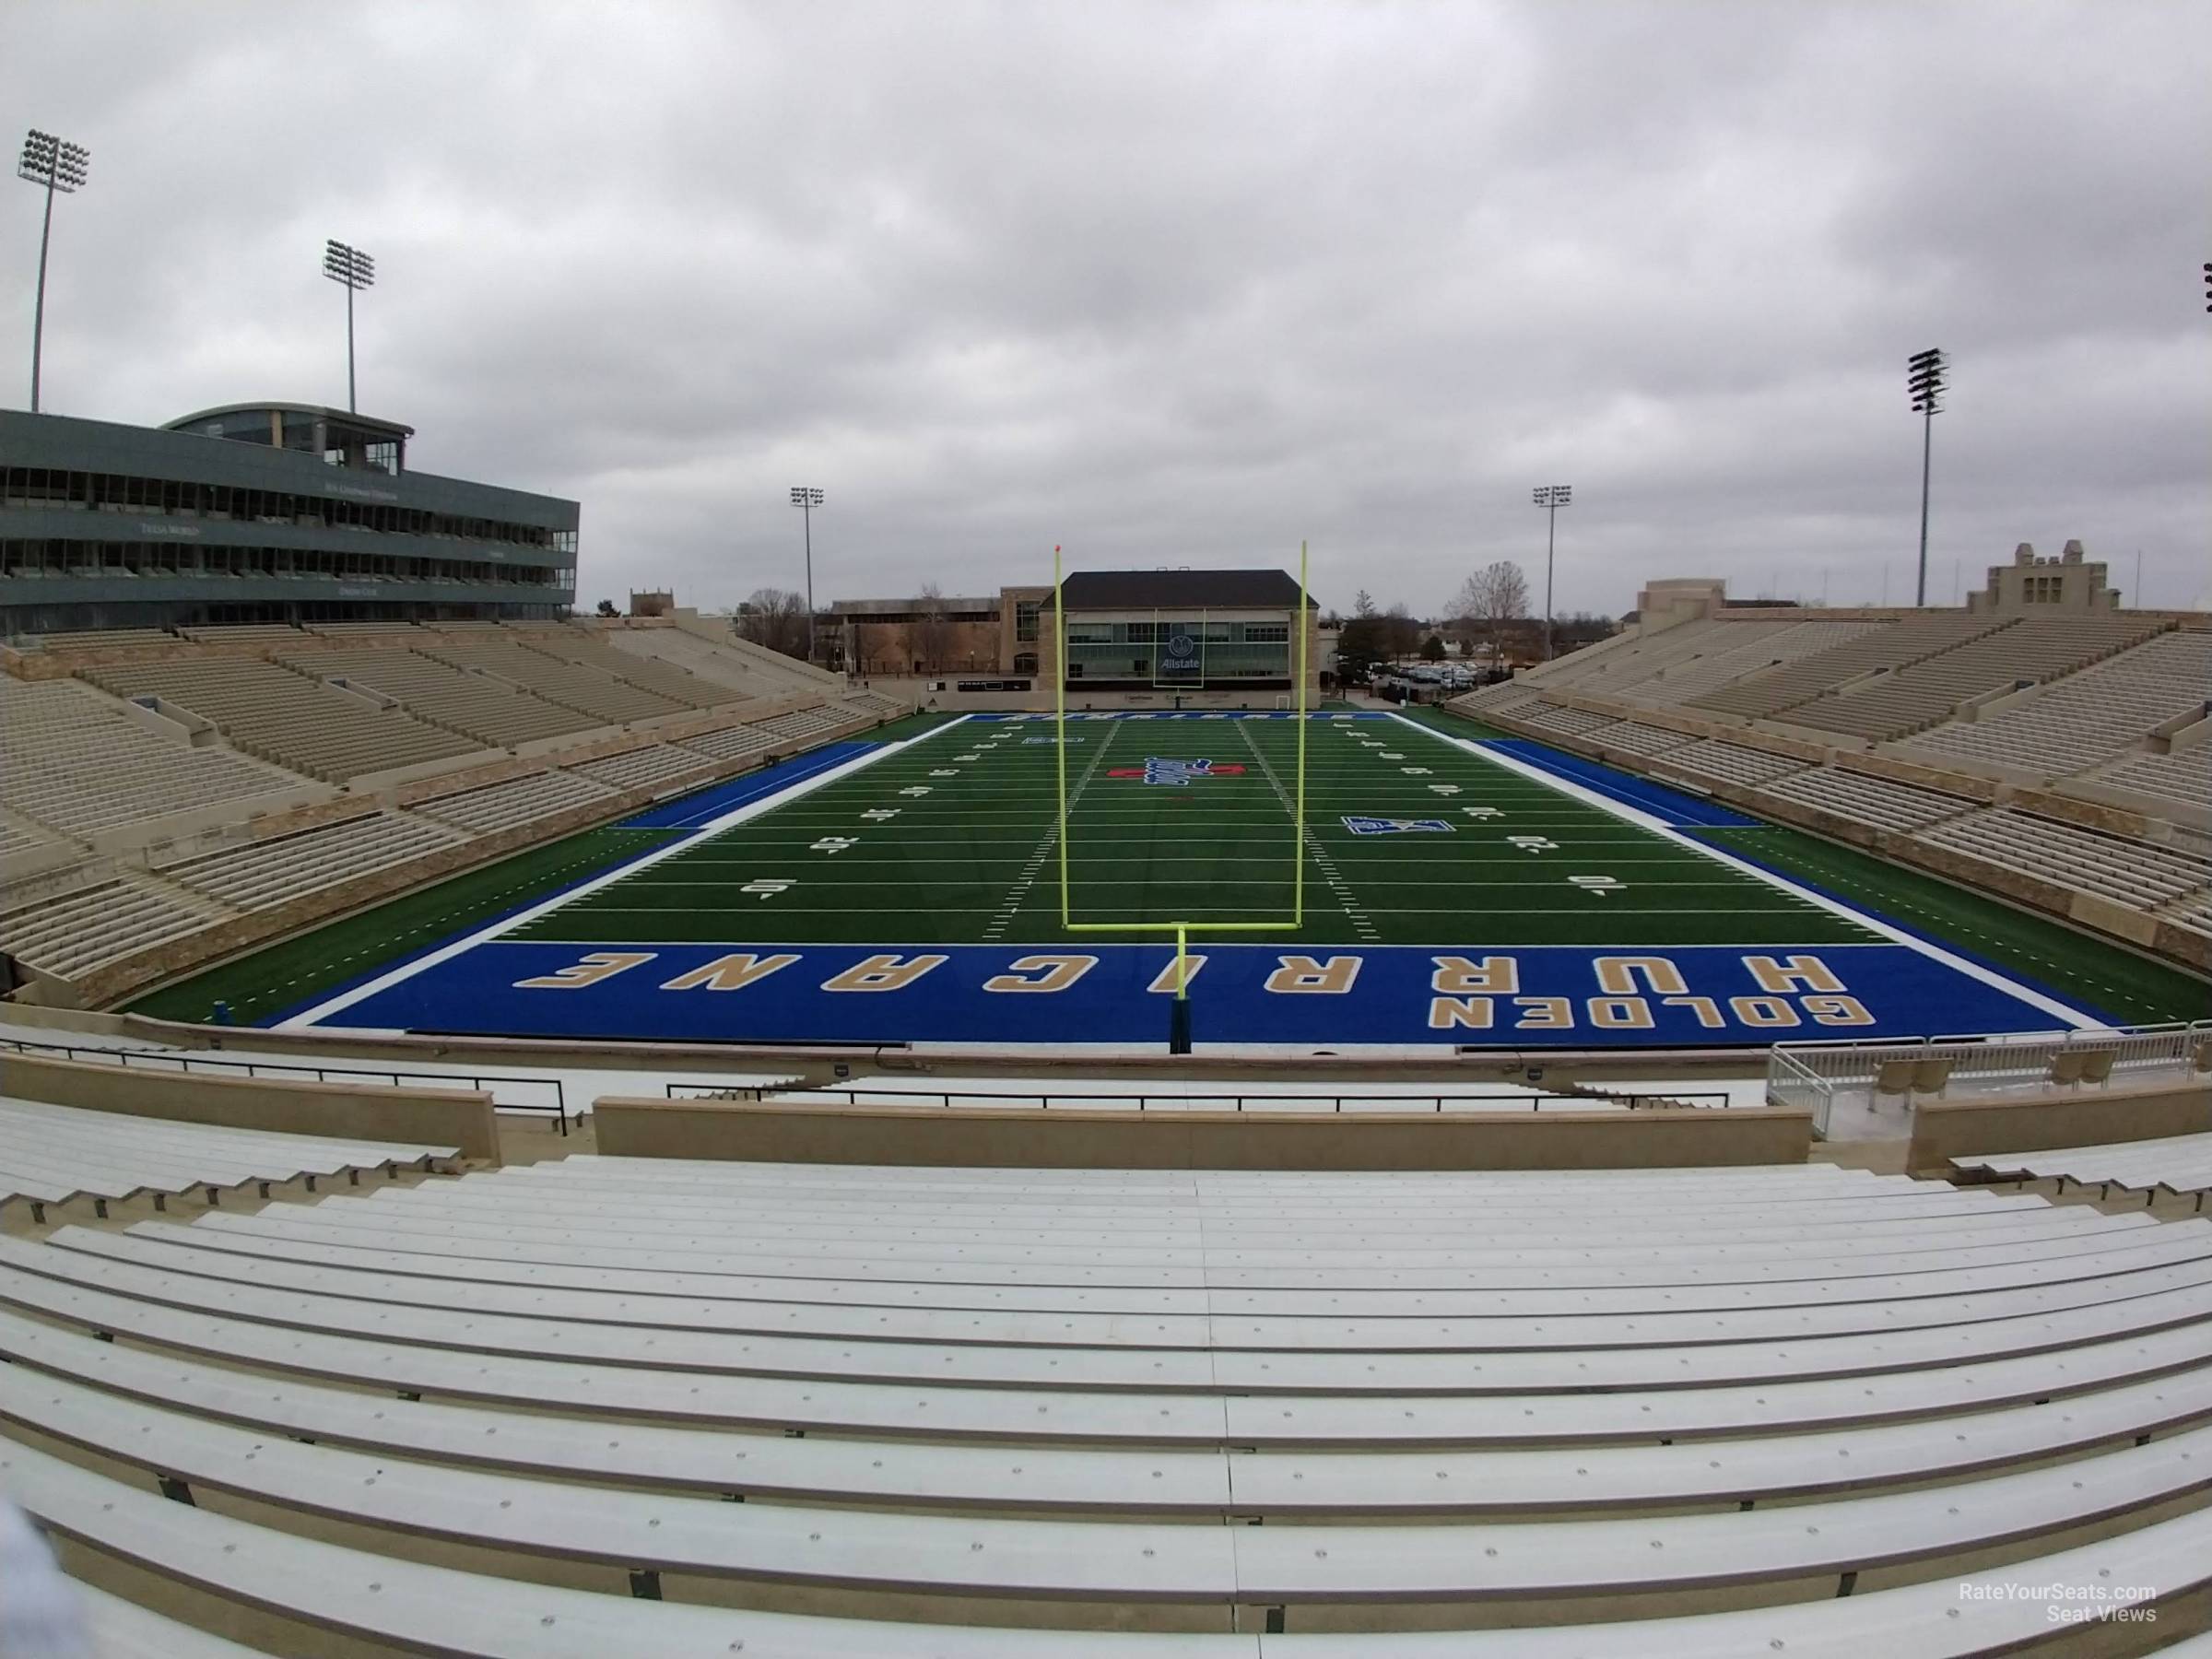 section 111, row 33 seat view  - h.a. chapman stadium